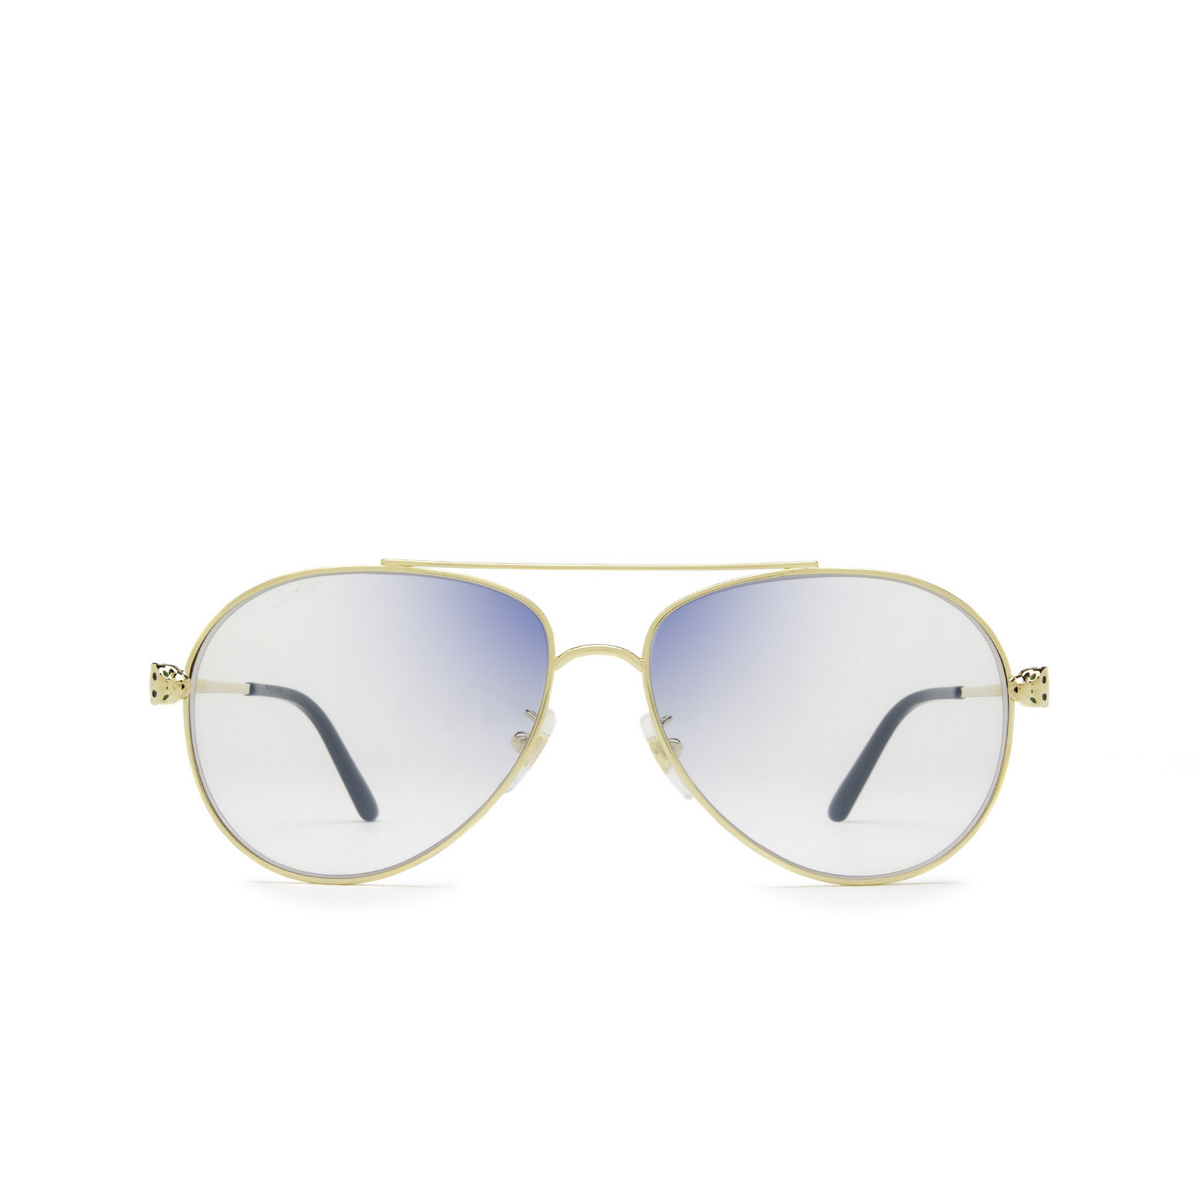 Cartier® Aviator Sunglasses: CT0233S color Gold 005 - front view.